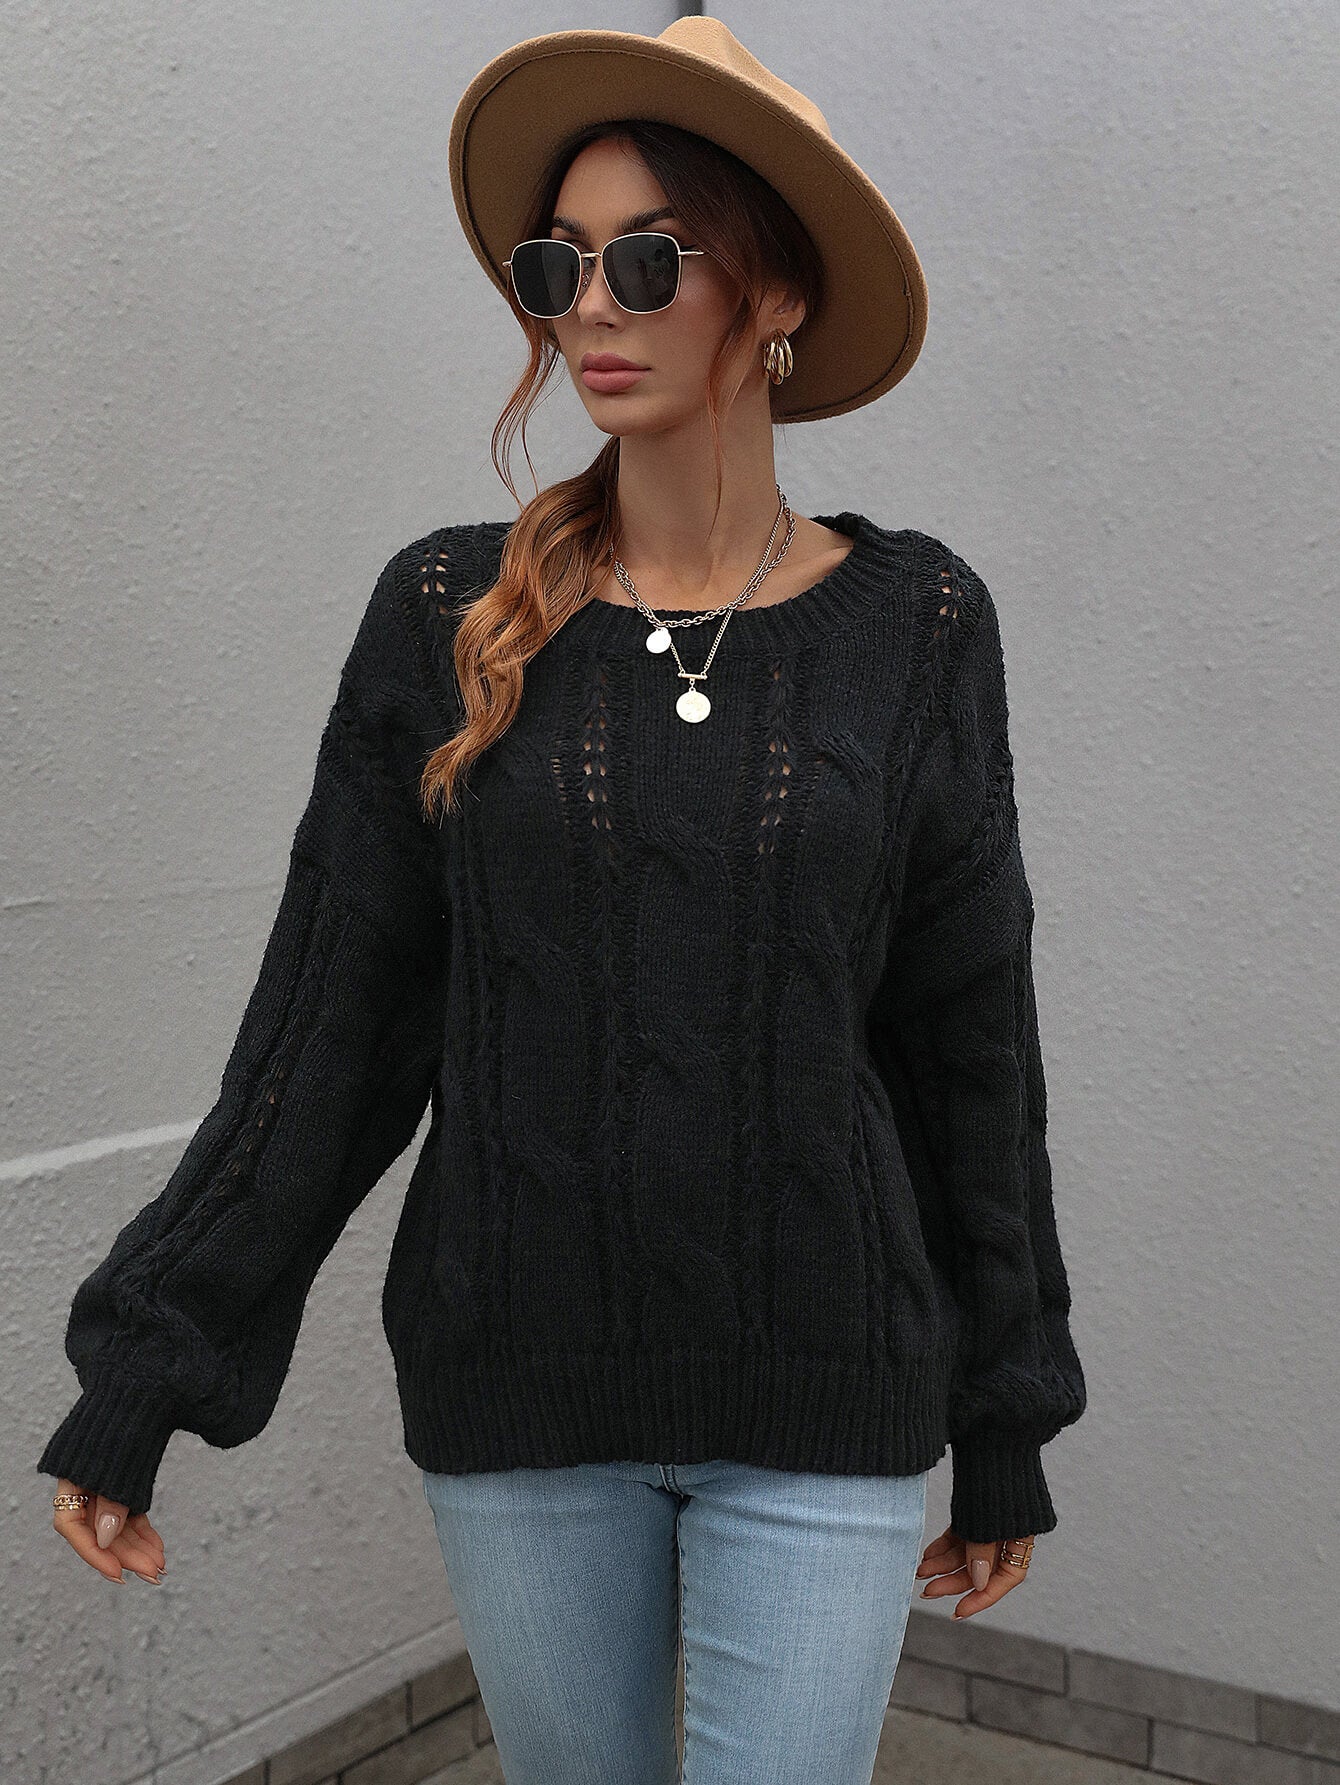 Woven Right Cable-Knit Openwork Round Neck Sweater